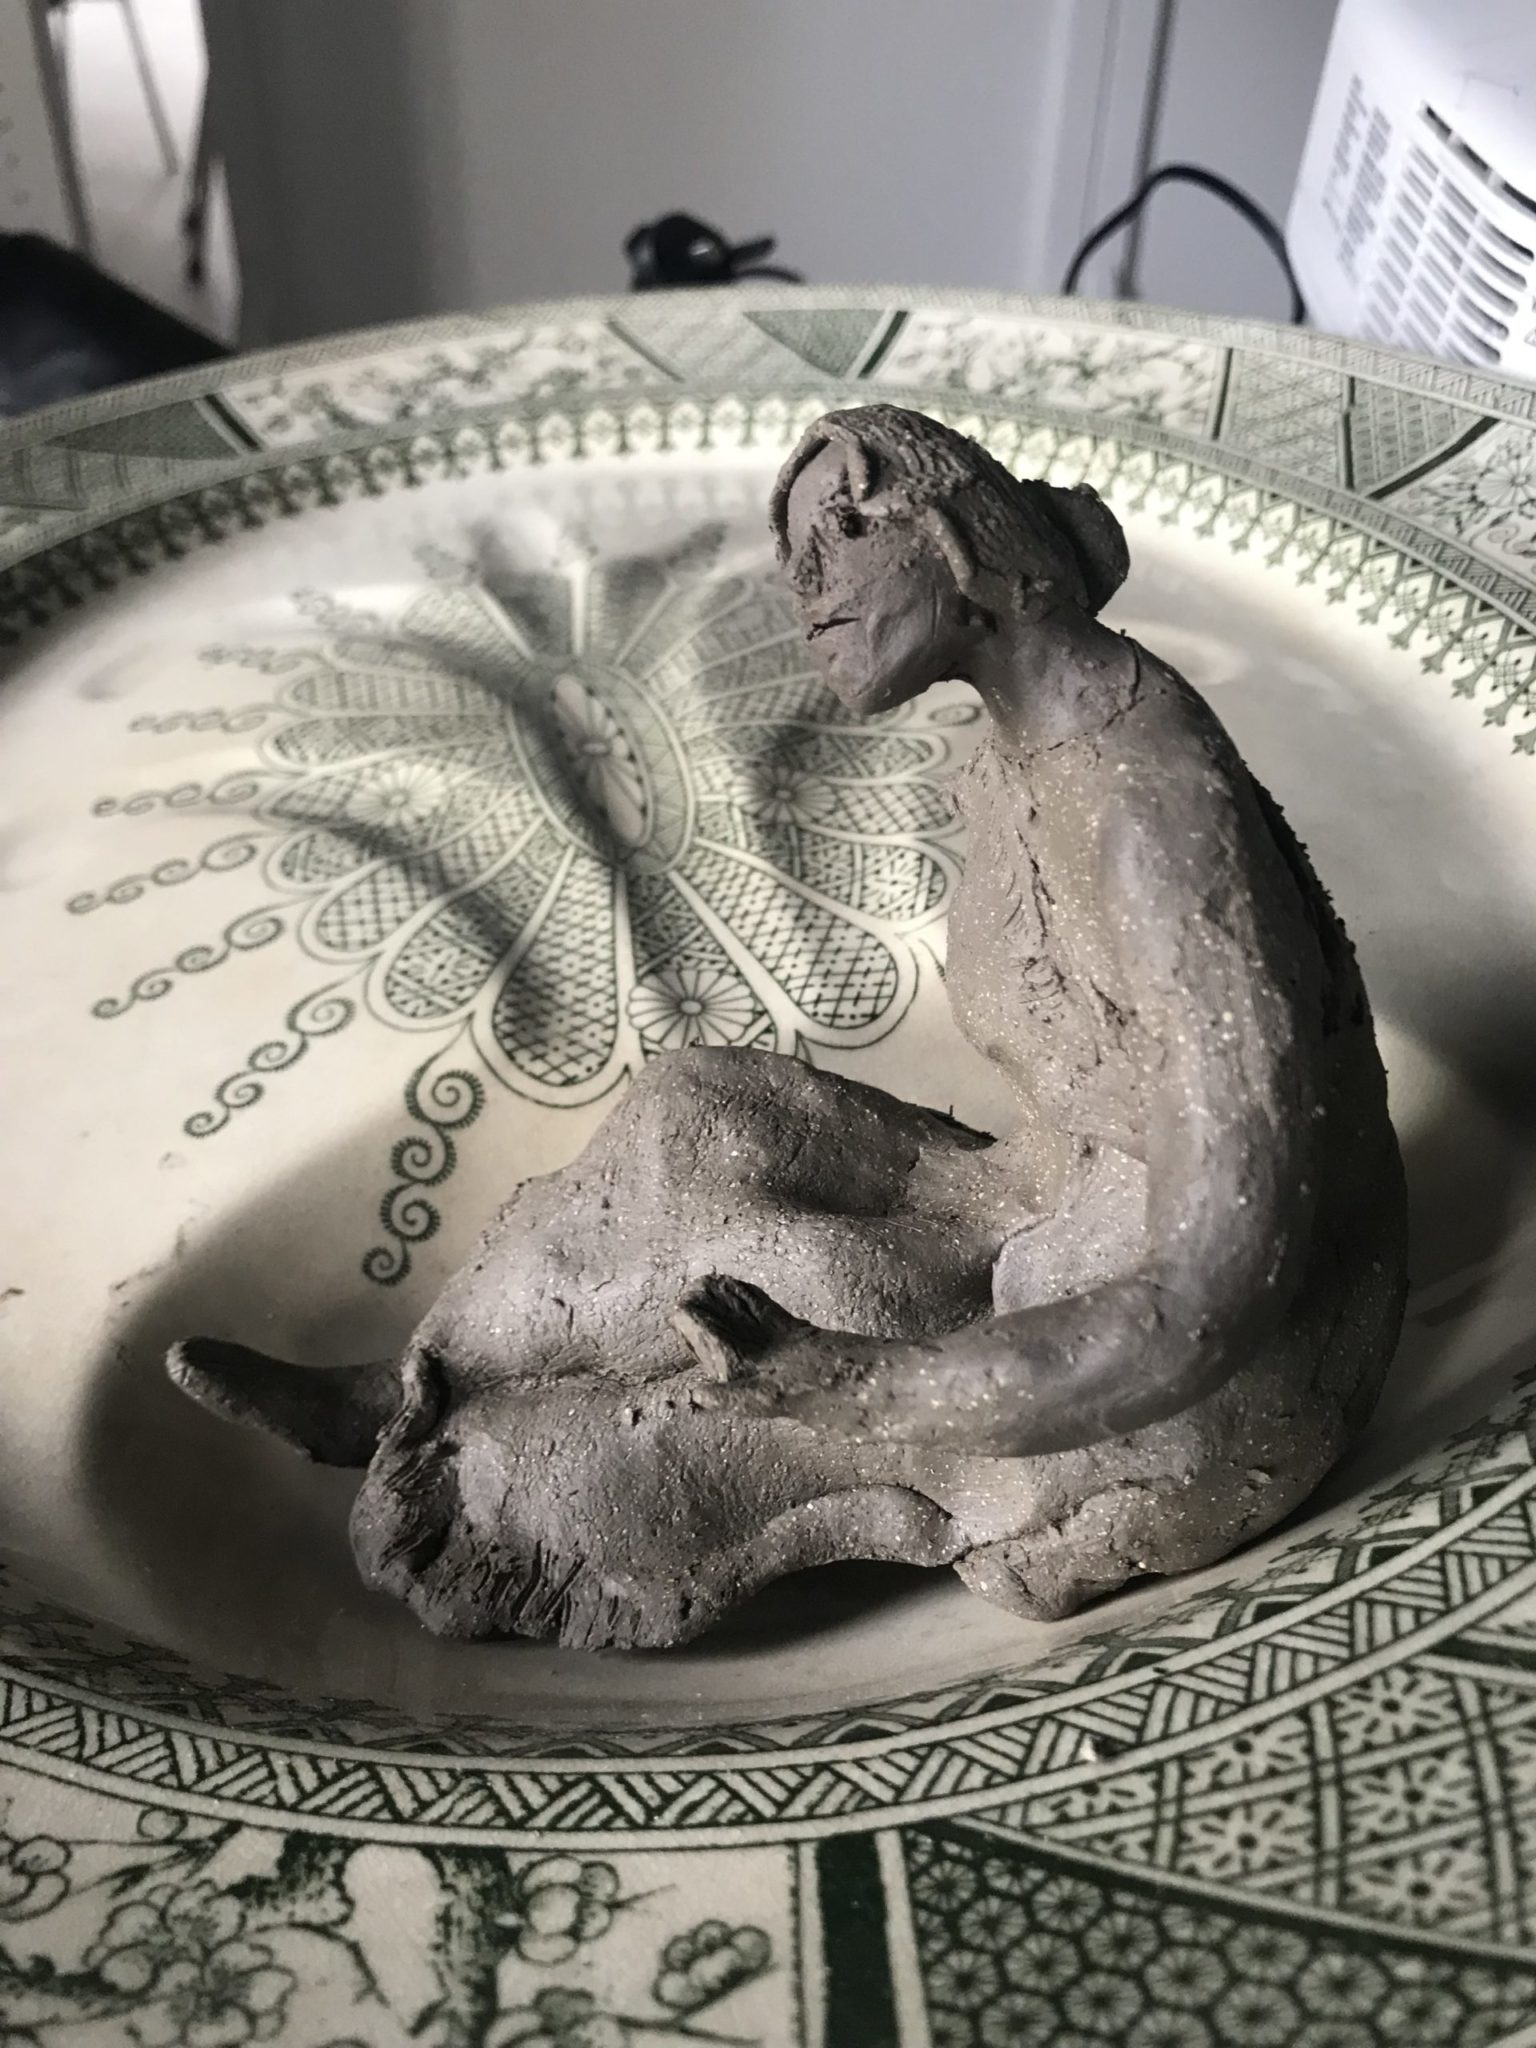 clay figure of a woman scaled to a found serving platter